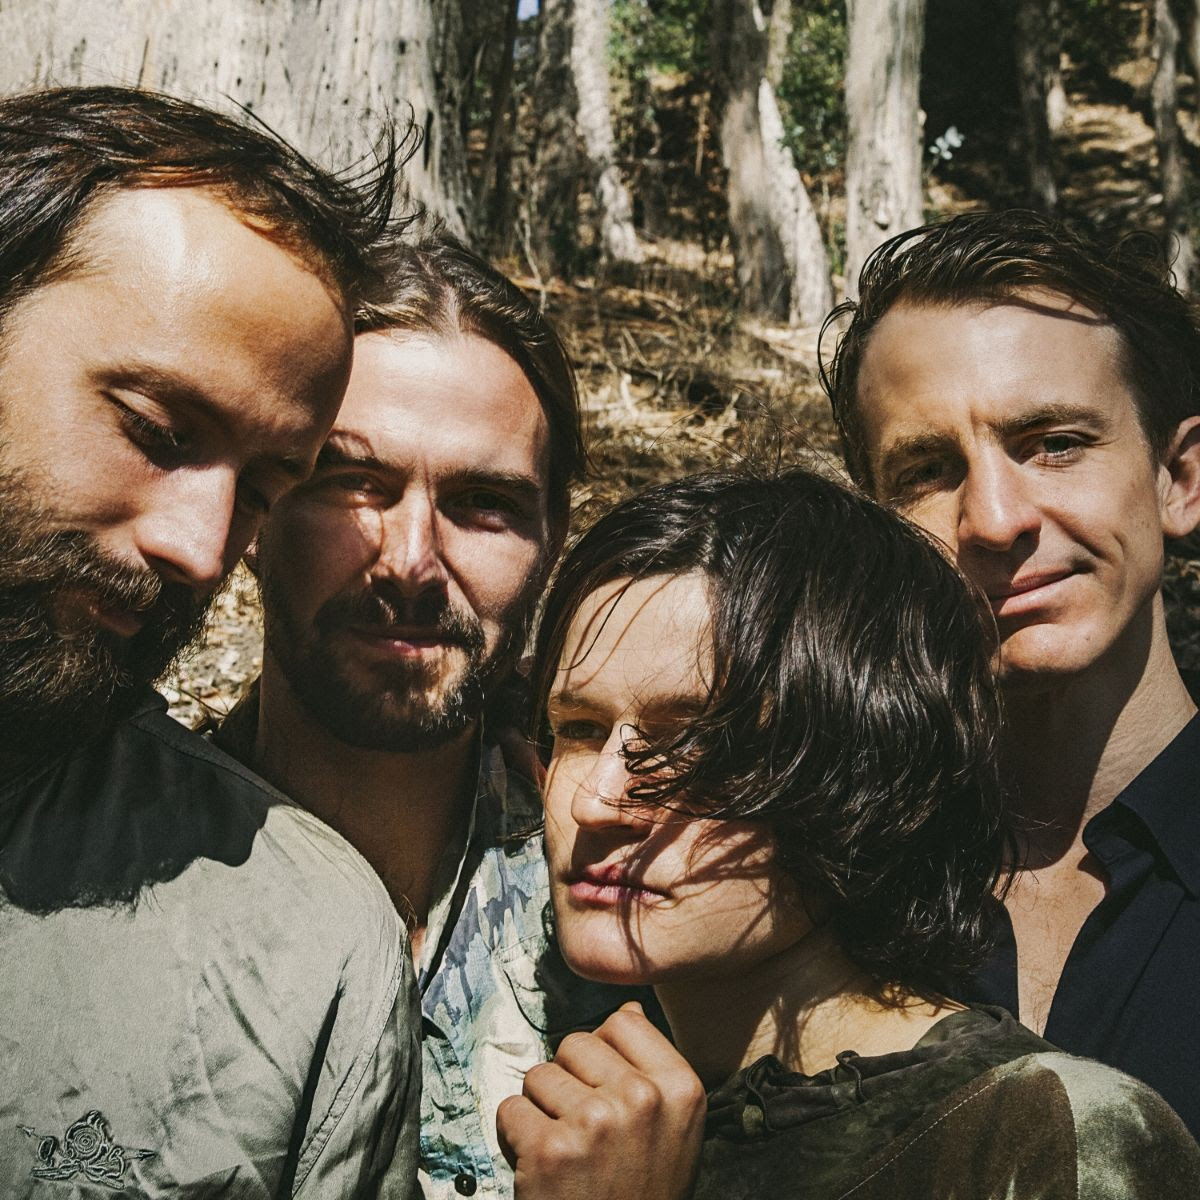 Big Thief Announce New Album <i></noscript>Two Hands</i>, Release “Not”” title=”Big Thief Two Hands Album Not Song Listen” data-original-id=”338736″ data-adjusted-id=”338736″ class=”sm_size_full_width sm_alignment_center ” data-image-use=”multiple_use” data-image-source=”video_screenshot” />
<p>1. Rock And Sing<br />
2. Forgotten Eyes<br />
3. The Toy<br />
4. Two Hands<br />
5. Those Girls<br />
6. Shoulders<br />
7. Not<br />
8. Wolf<br />
9. Replaced<br />
10. Cut My Hair</p>
</p> </div>
</div>
</div>
</div>
</div>
</section>
<section data-particle_enable=